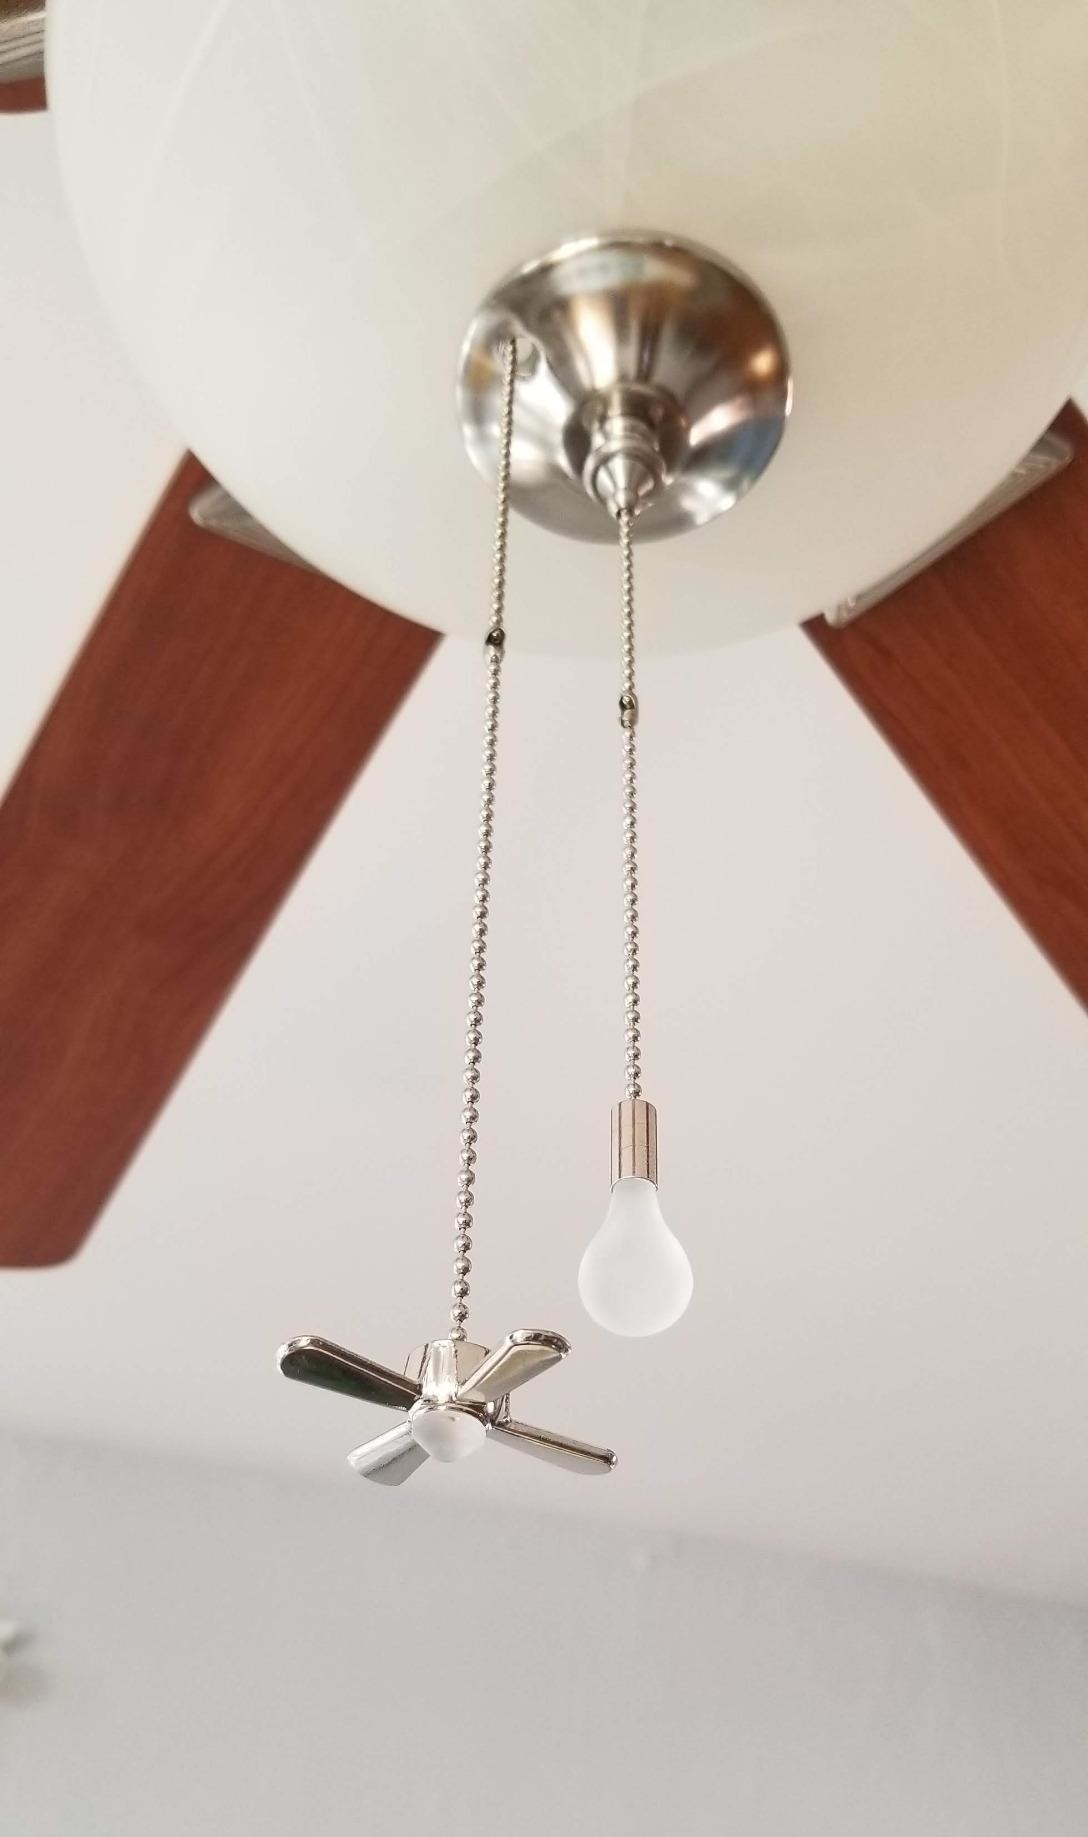 The product installed on a ceiling fan, one with a fan shaped pull and one with a lightbulb shape